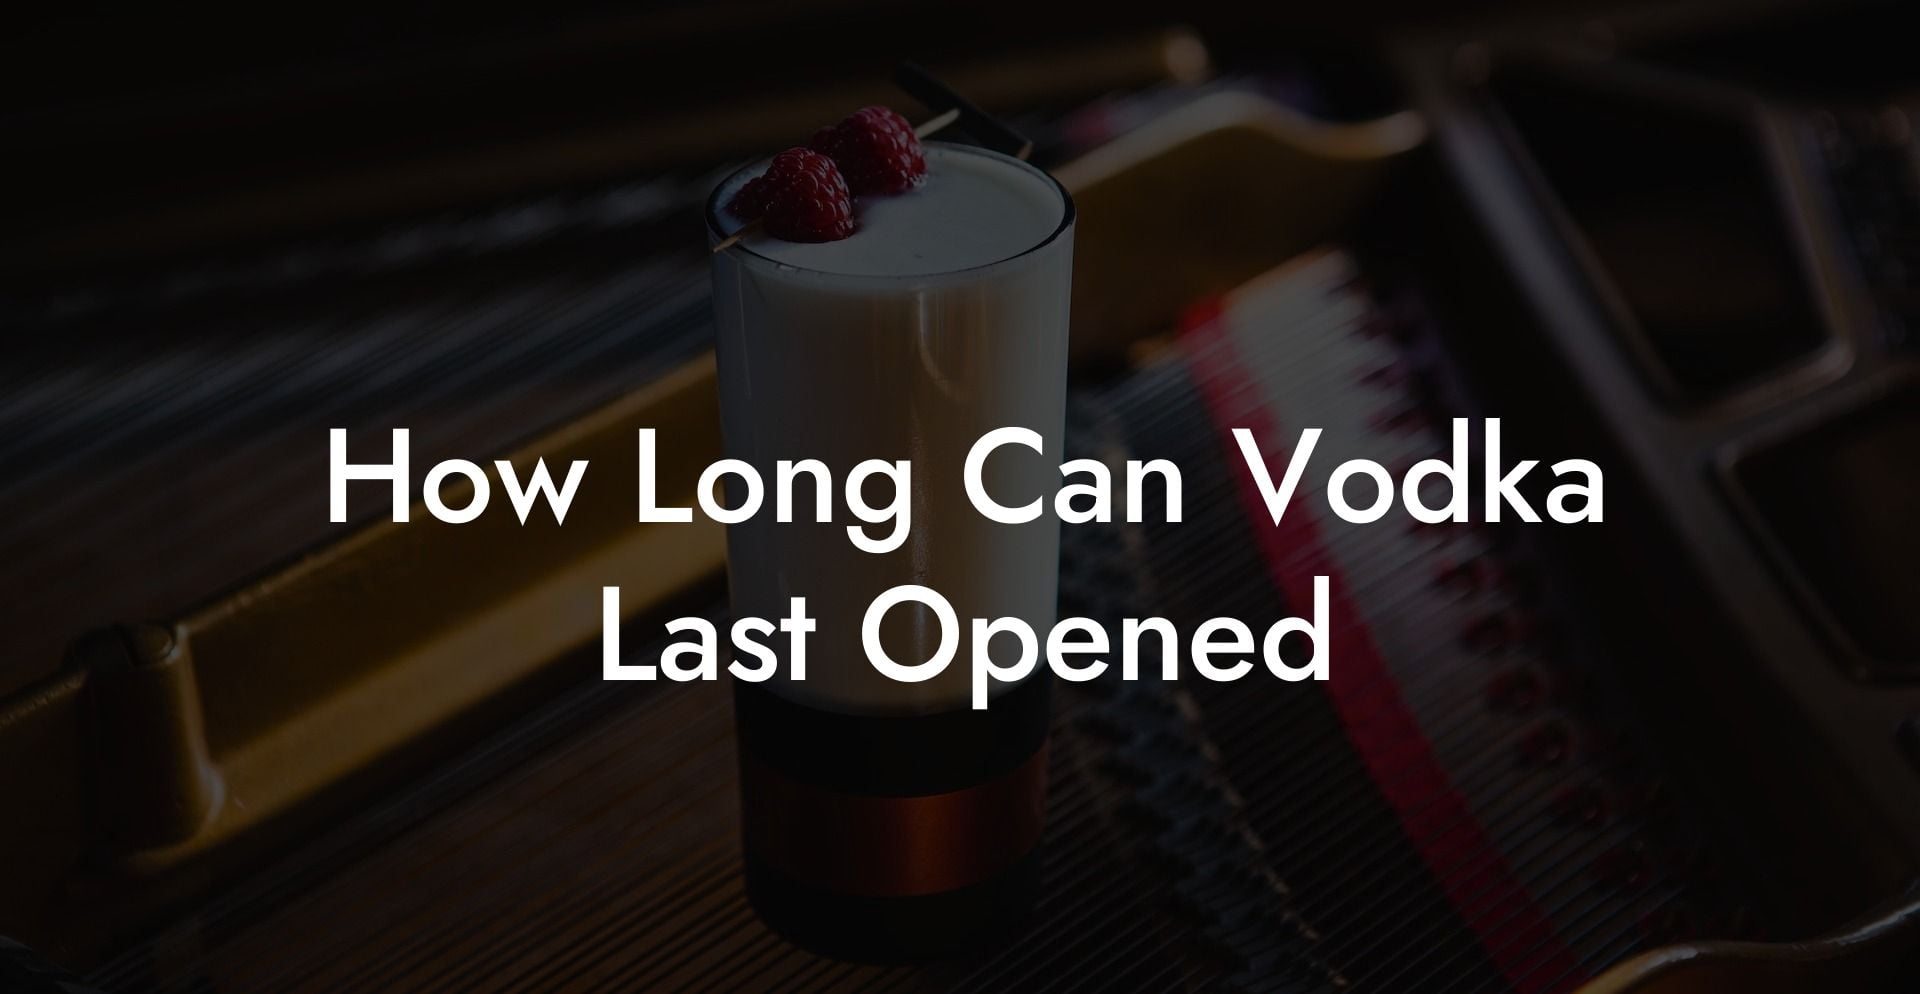 How Long Can Vodka Last Opened